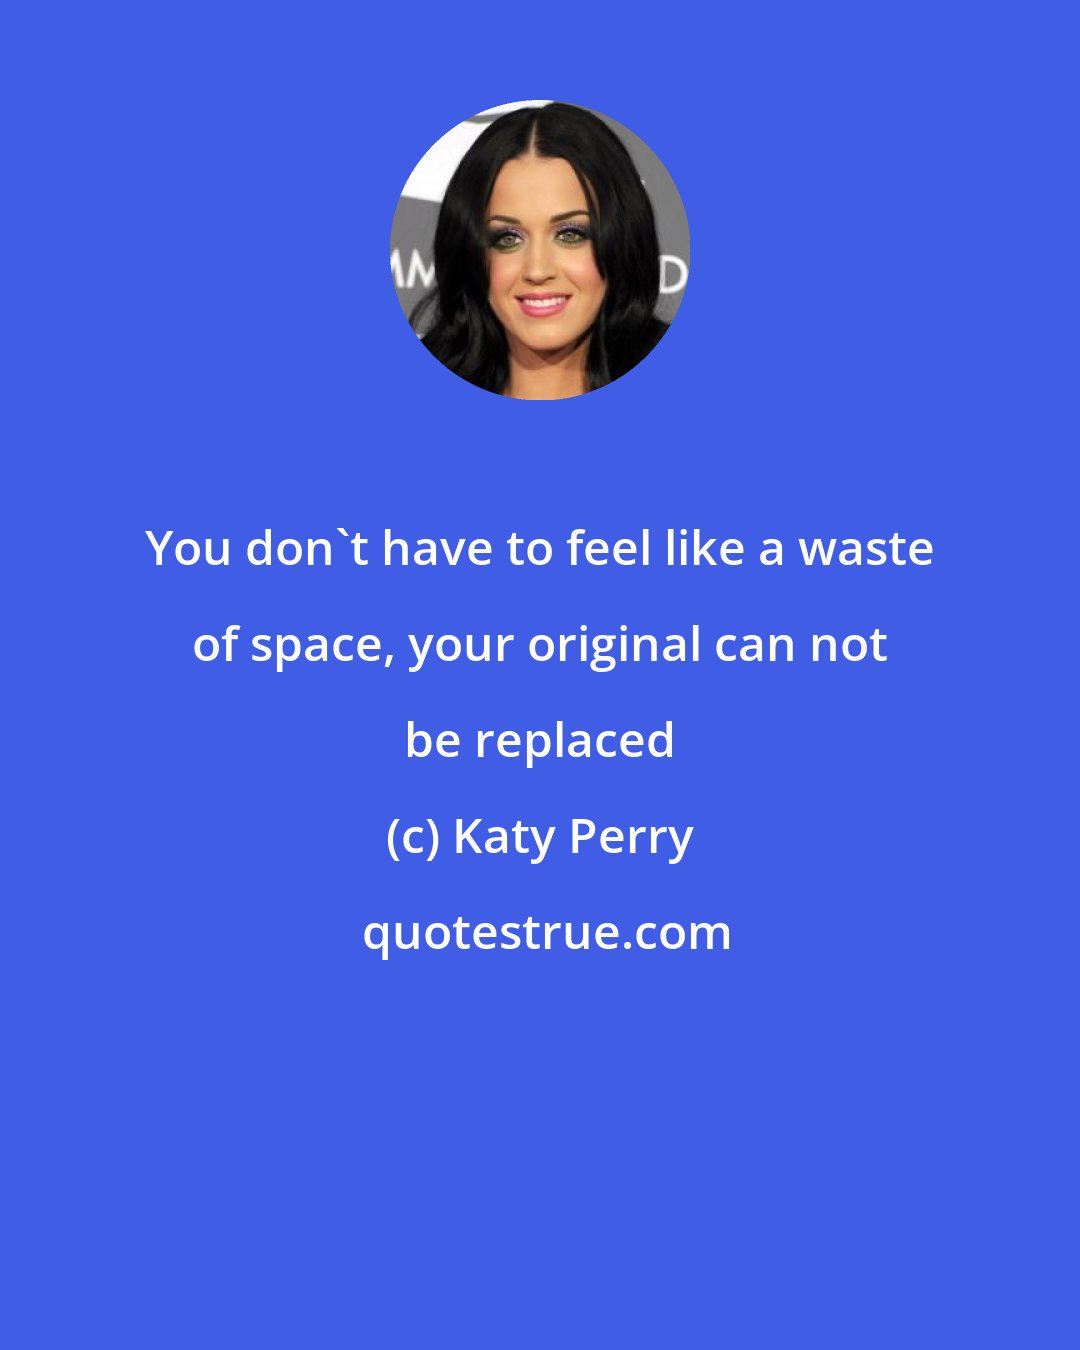 Katy Perry: You don't have to feel like a waste of space, your original can not be replaced